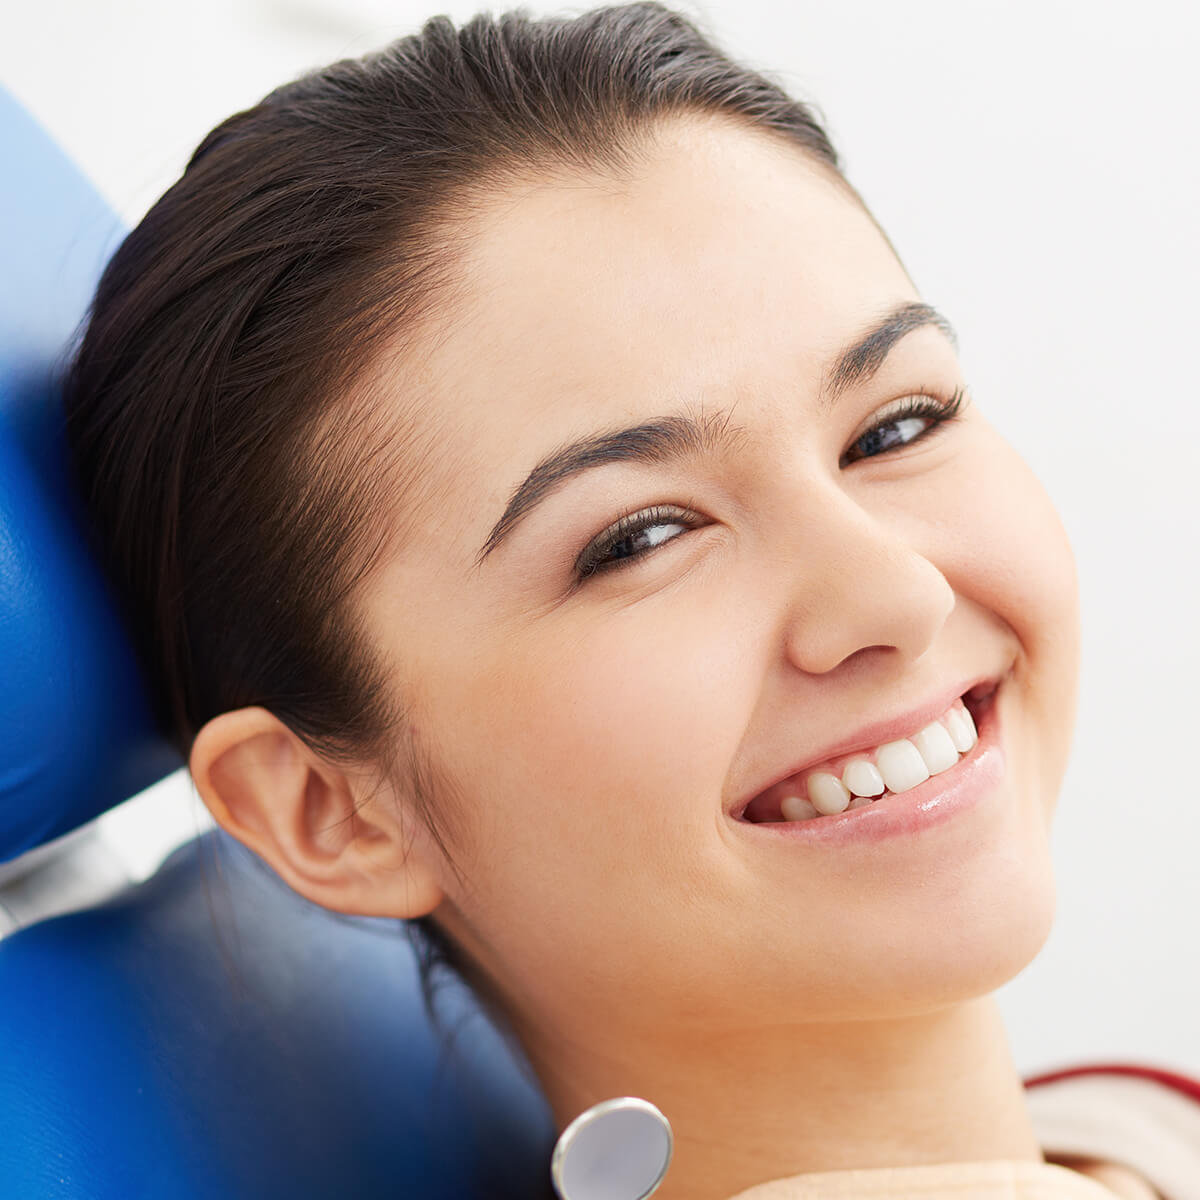 Cosmetic Dentistry Services in Knoxville TN Area